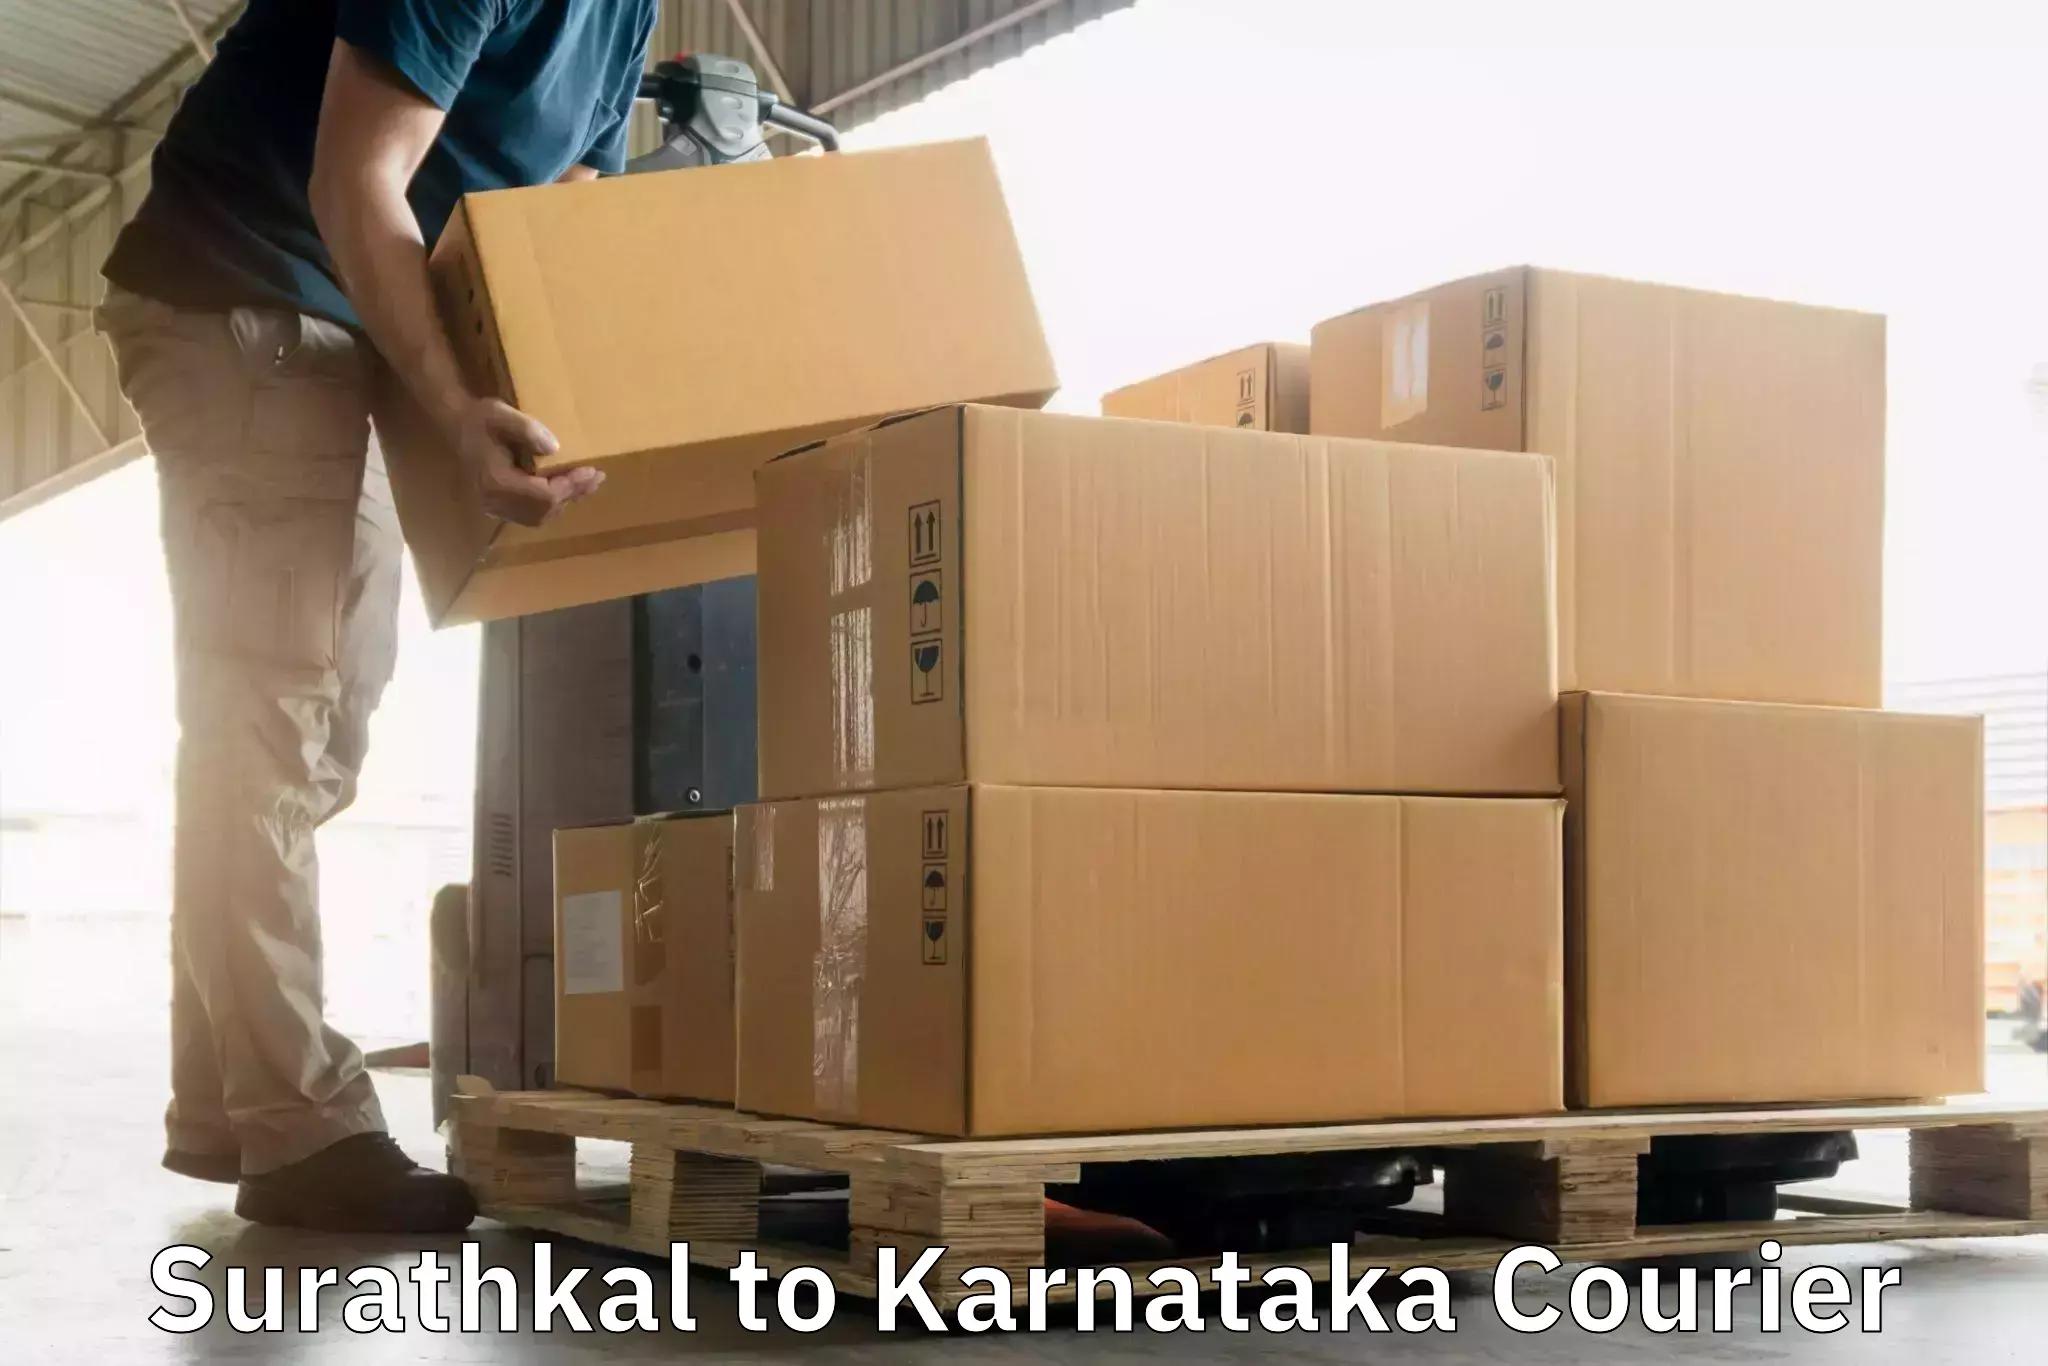 Holiday shipping services Surathkal to Kollegal